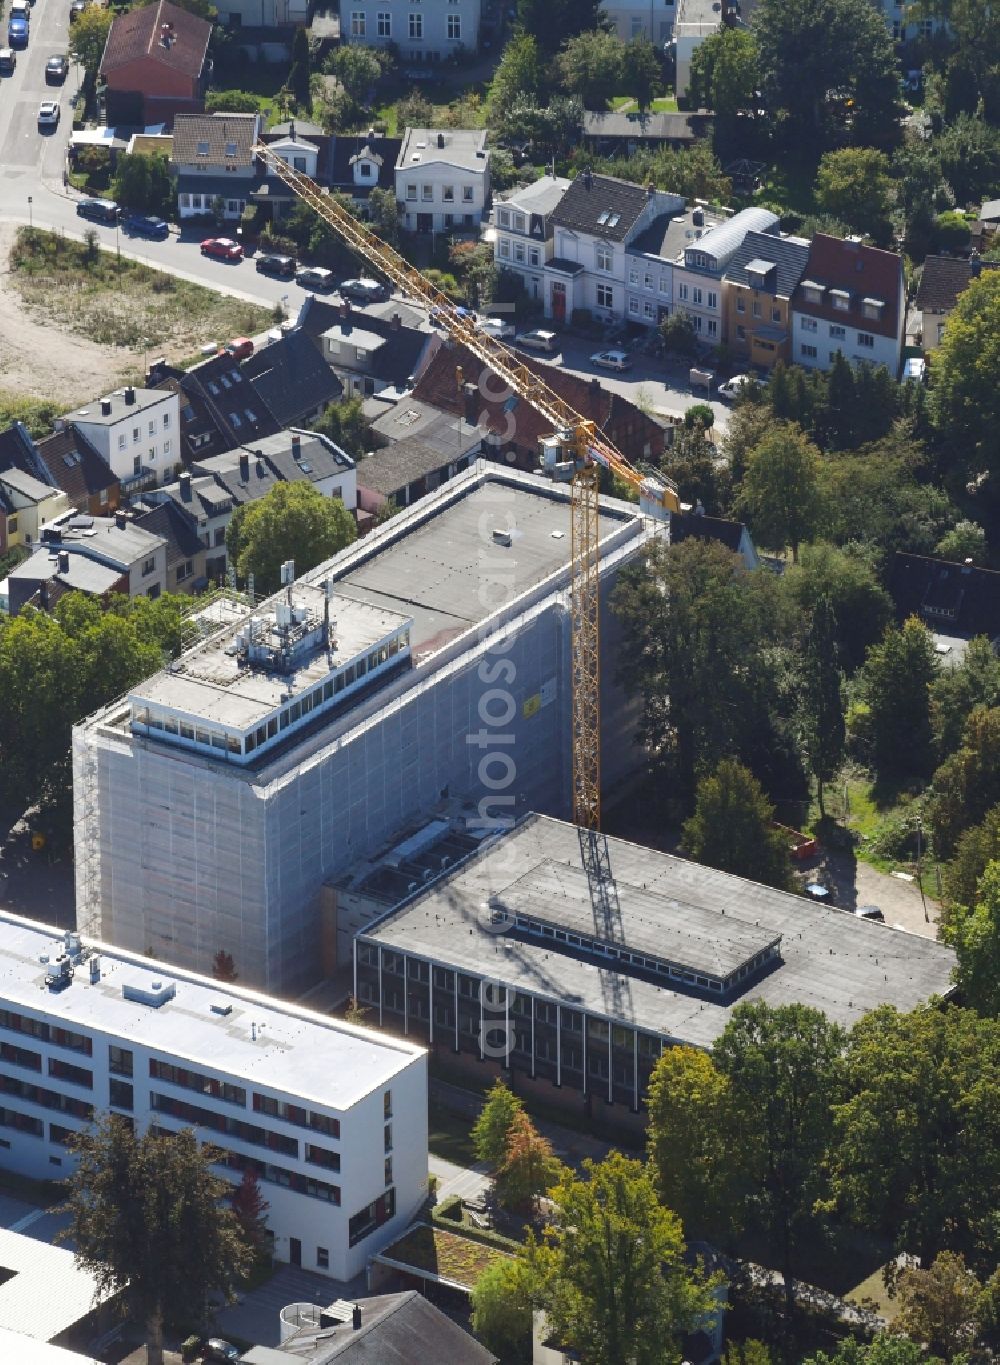 Aerial image Lübeck - Construction site for the rehabilitation of the District Court Luebeck Am Burgfeld in Luebeck in the state of Schleswig-Holstein, Germany